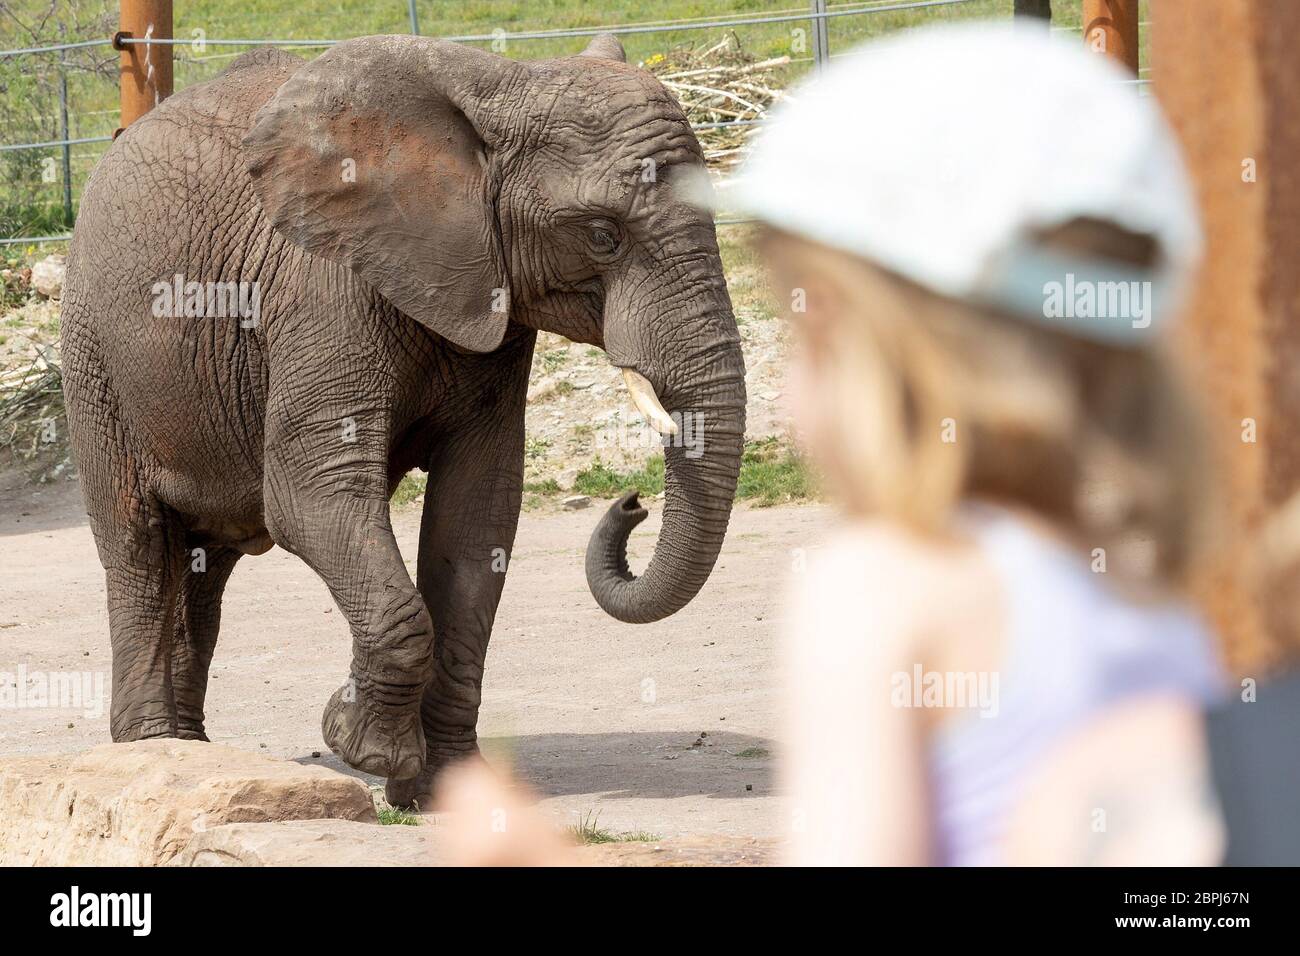 Erfurt, Germany. 19th May, 2020. The pregnant elephant cow 